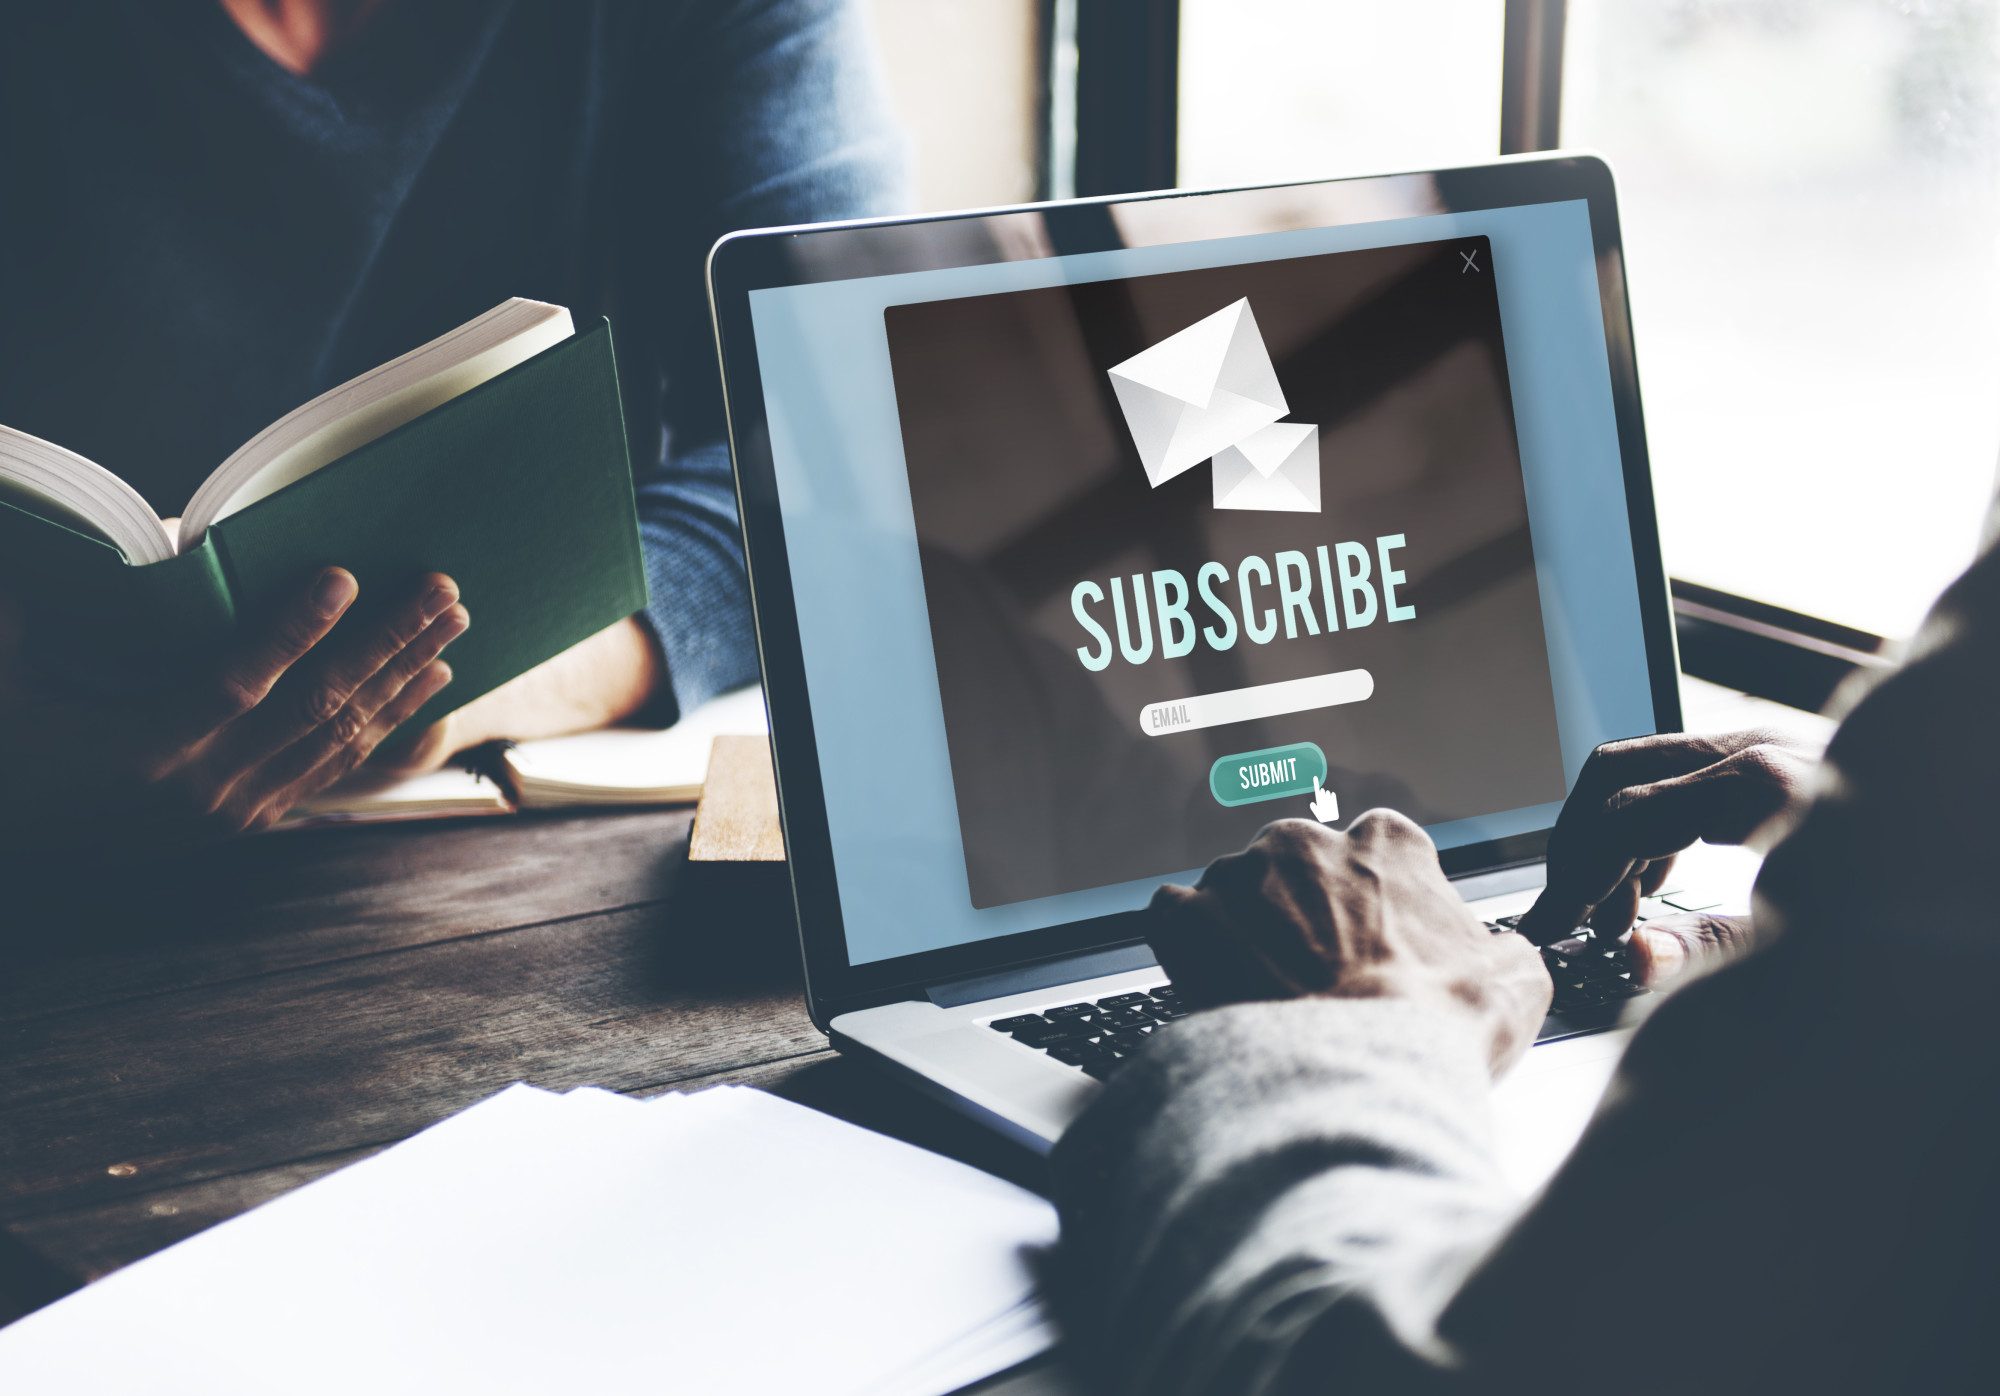 Subscription Business